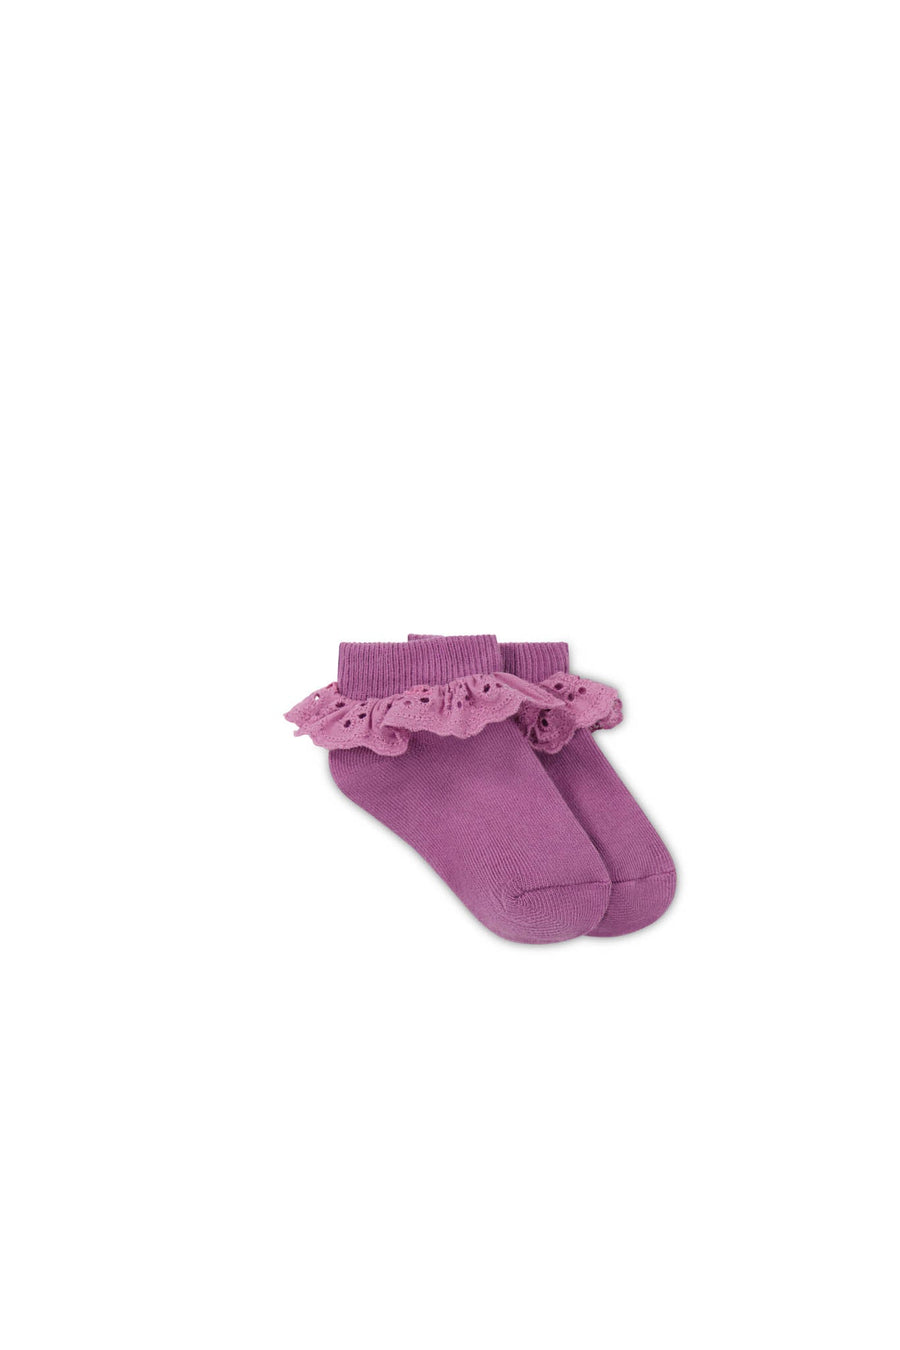 Frill Ankle Sock - Berry Jam Childrens Sock from Jamie Kay USA